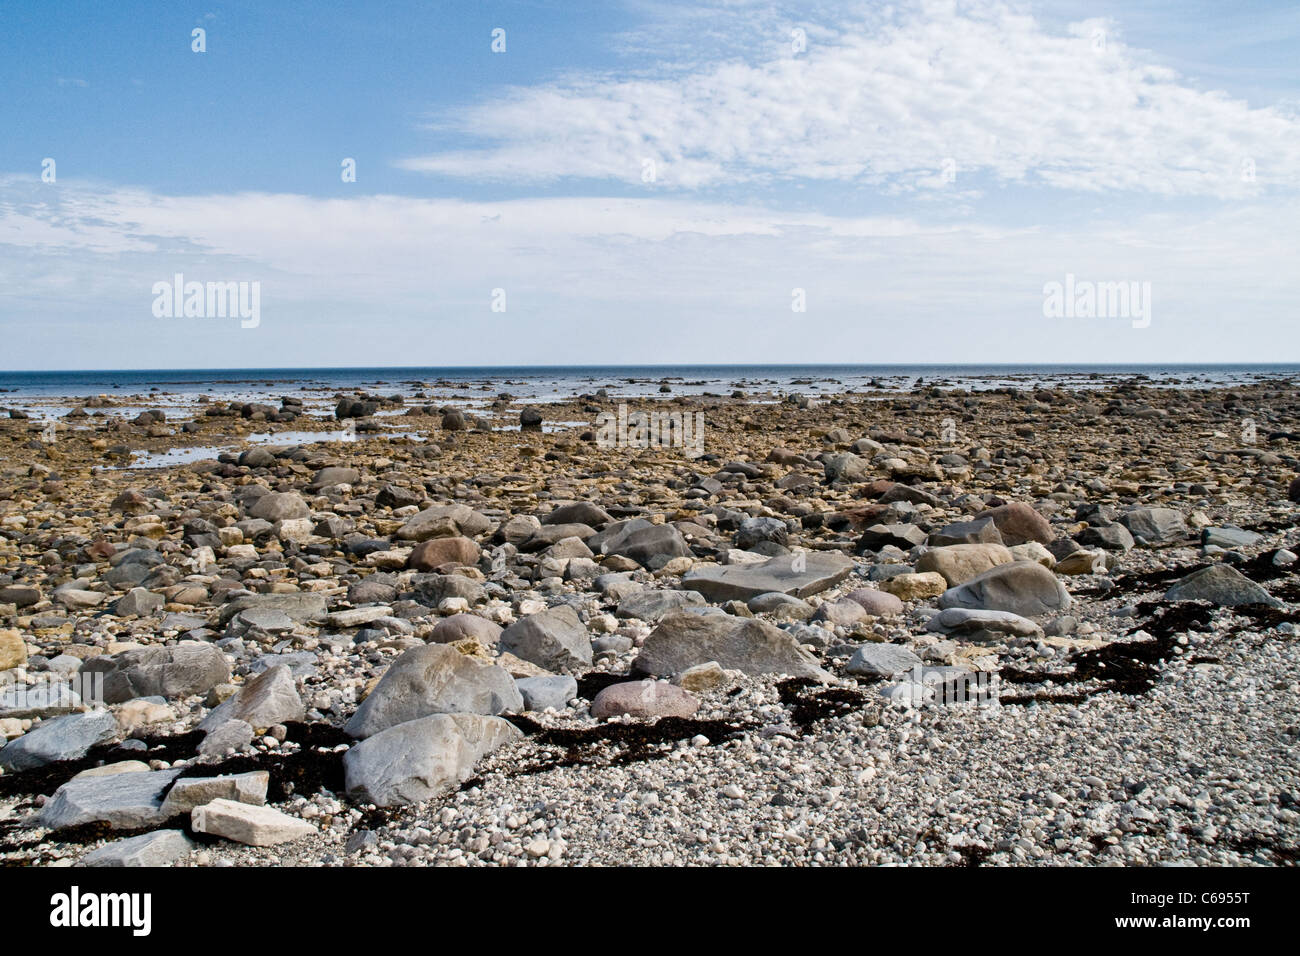 The exposed shores on the west coast of Hudson Bay at low tide, Arctic Ocean, near the town of Churchill, Manitoba, Canada. Stock Photo